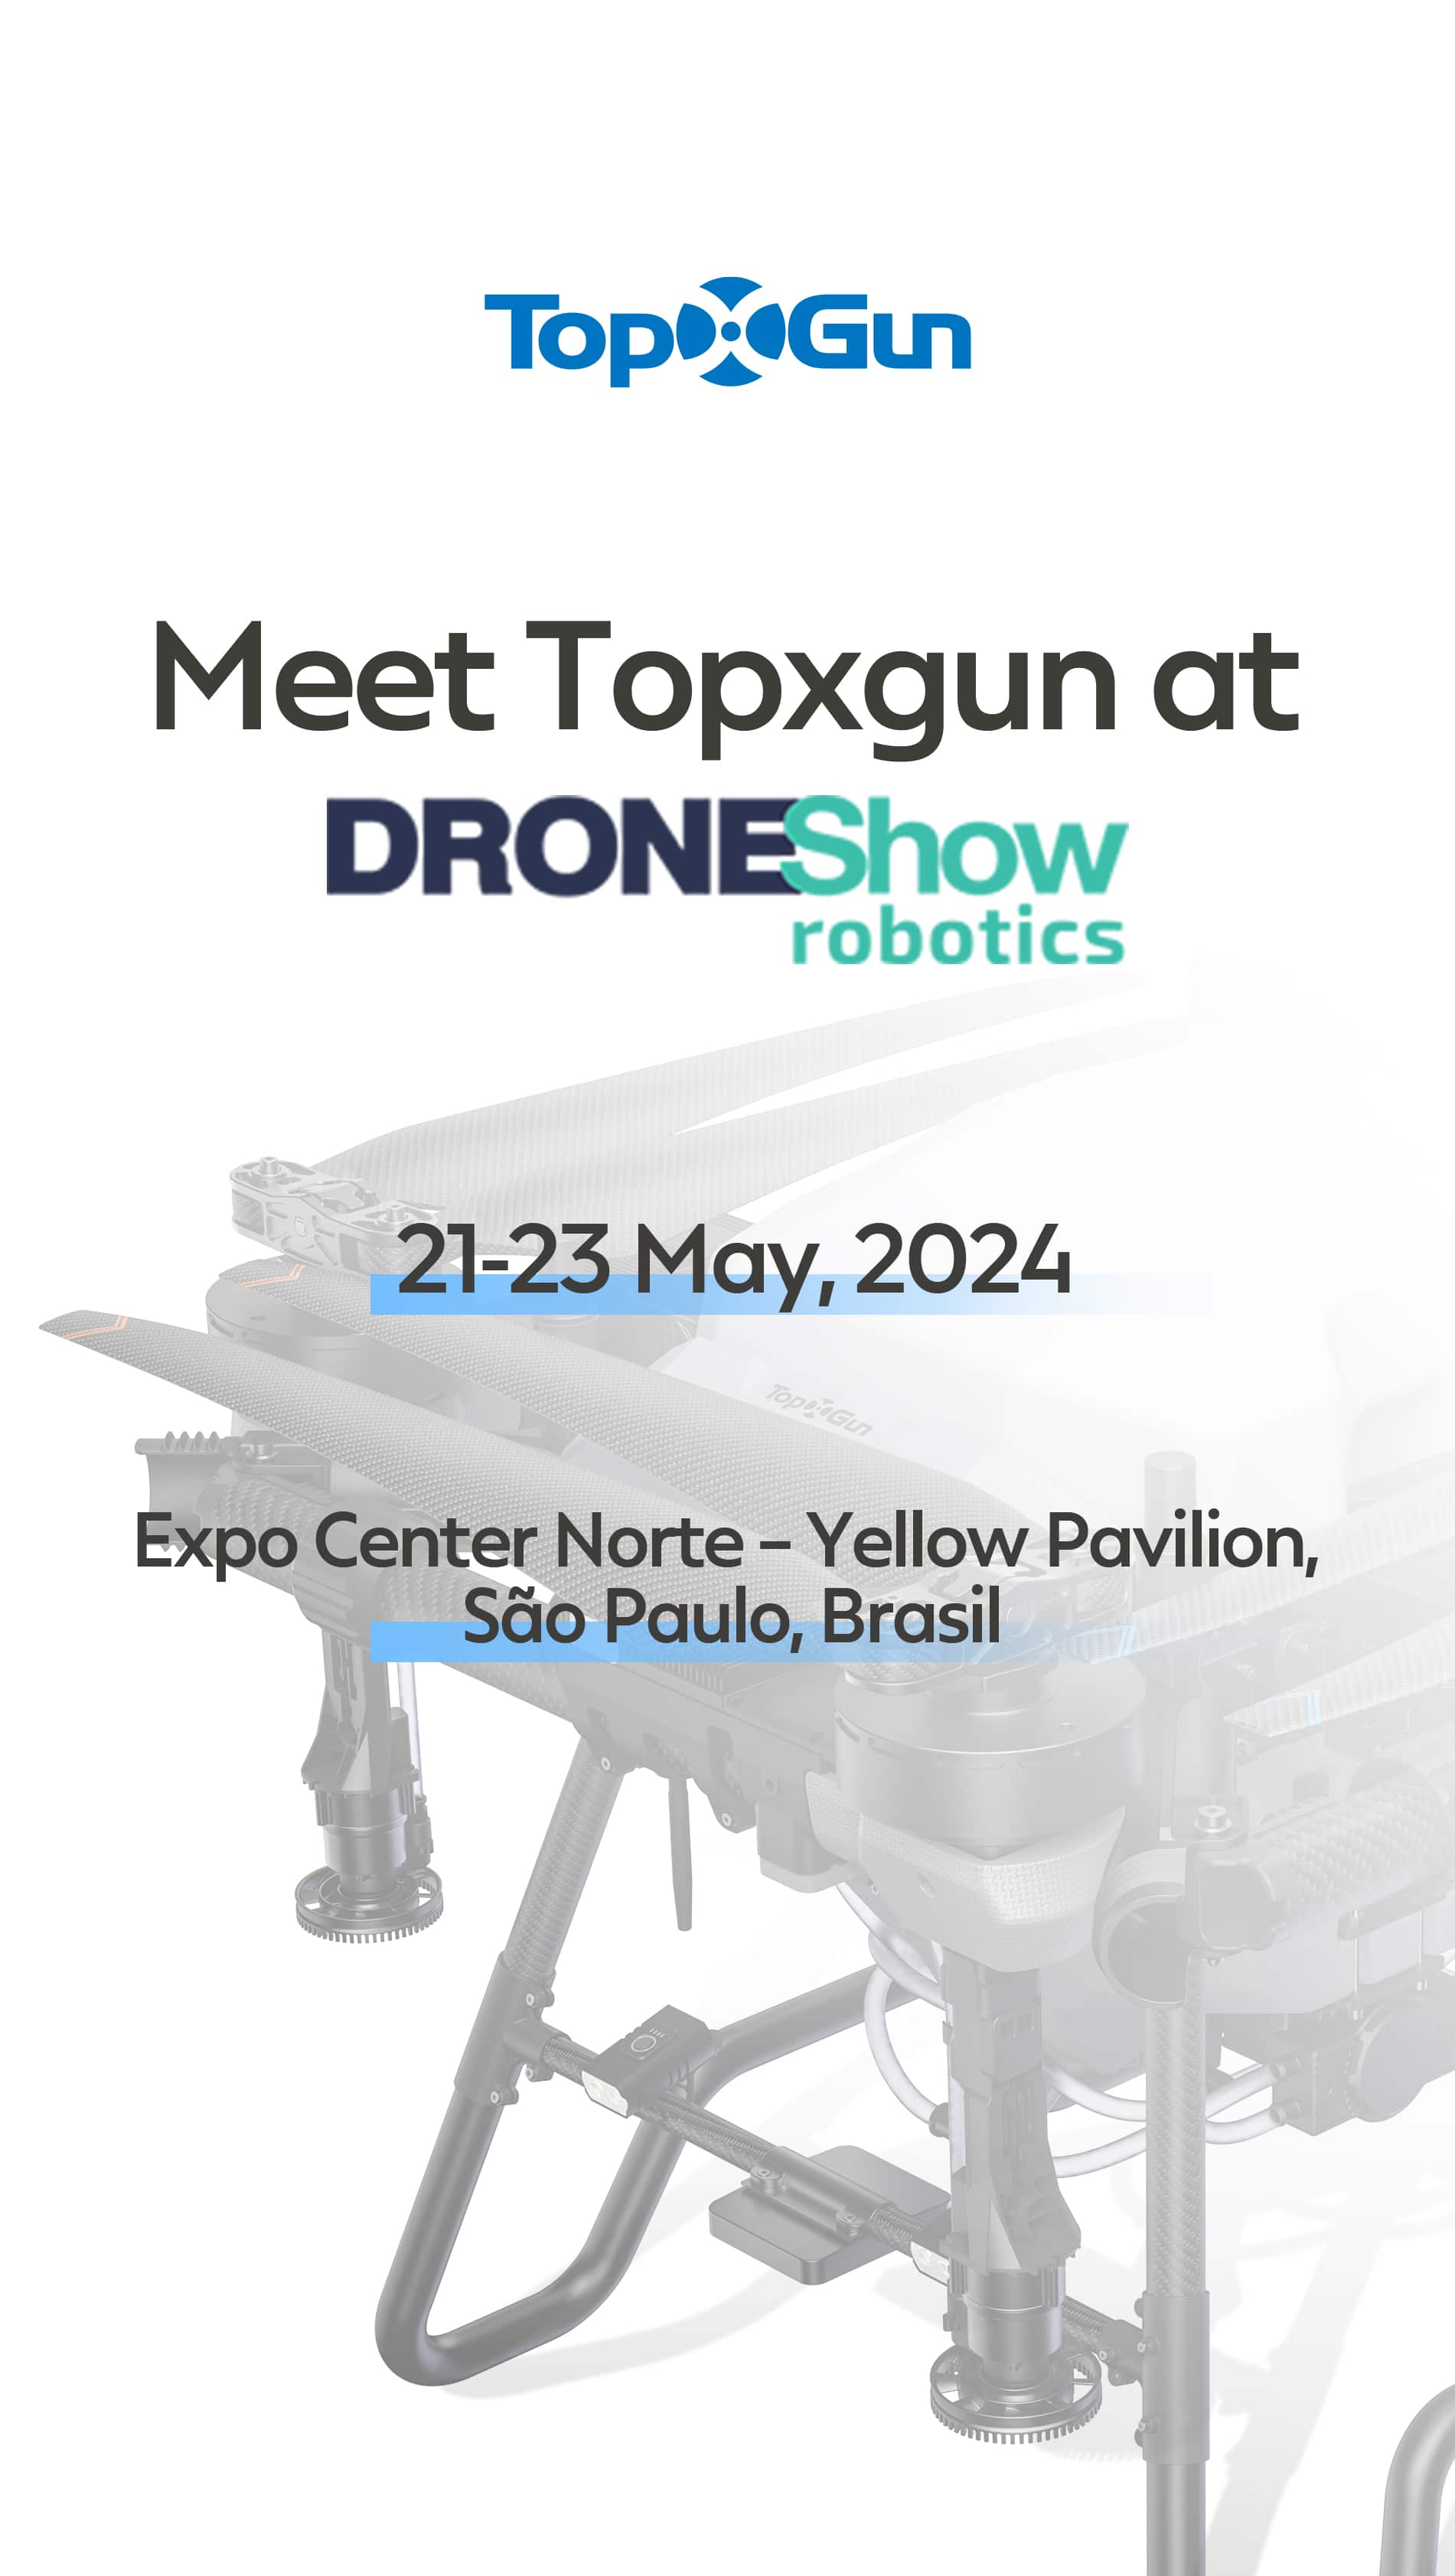 Topxgun invited all the customers who are interested in the Drone technology and UAV industry, If you want to discover win-win opportunities for collaboration, welcome to come to the show and visit our booth for further discuss!